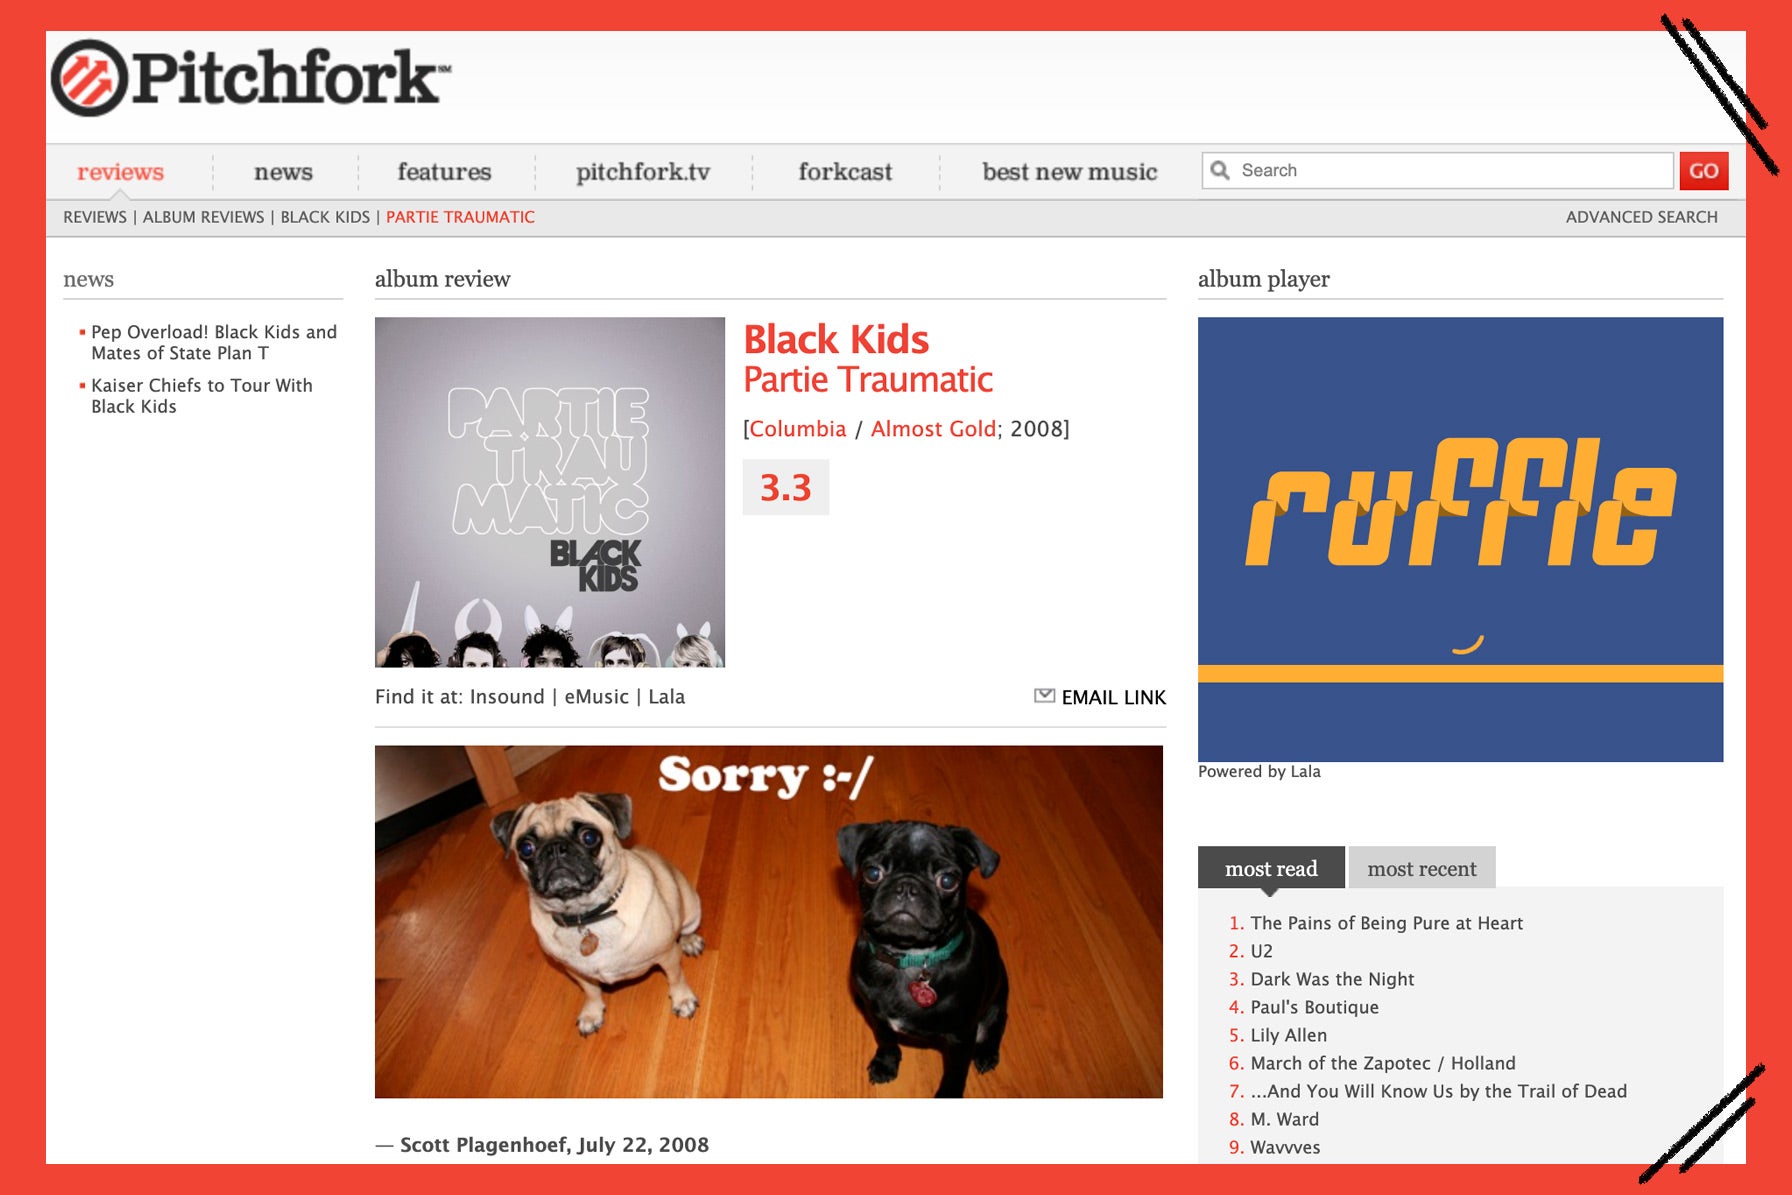 A screenshot of the Pitchfork review has the emoji Sorry :-/ over a picture of two pugs. 